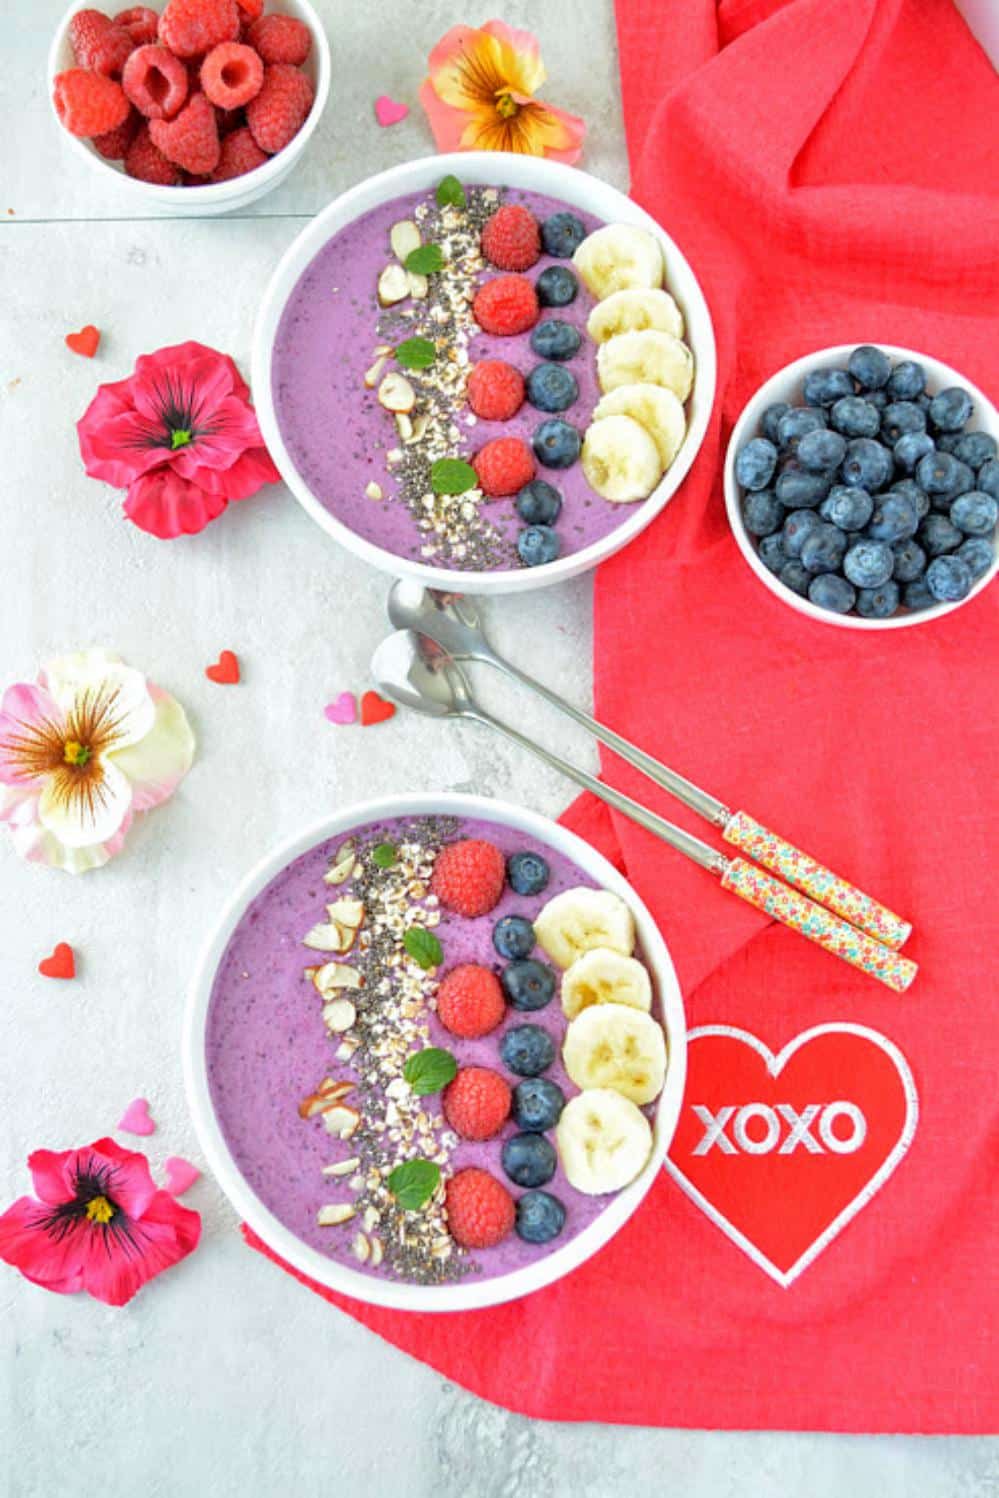 healthy-blueberry-smoothie-recipe-6 (1)_Fotor